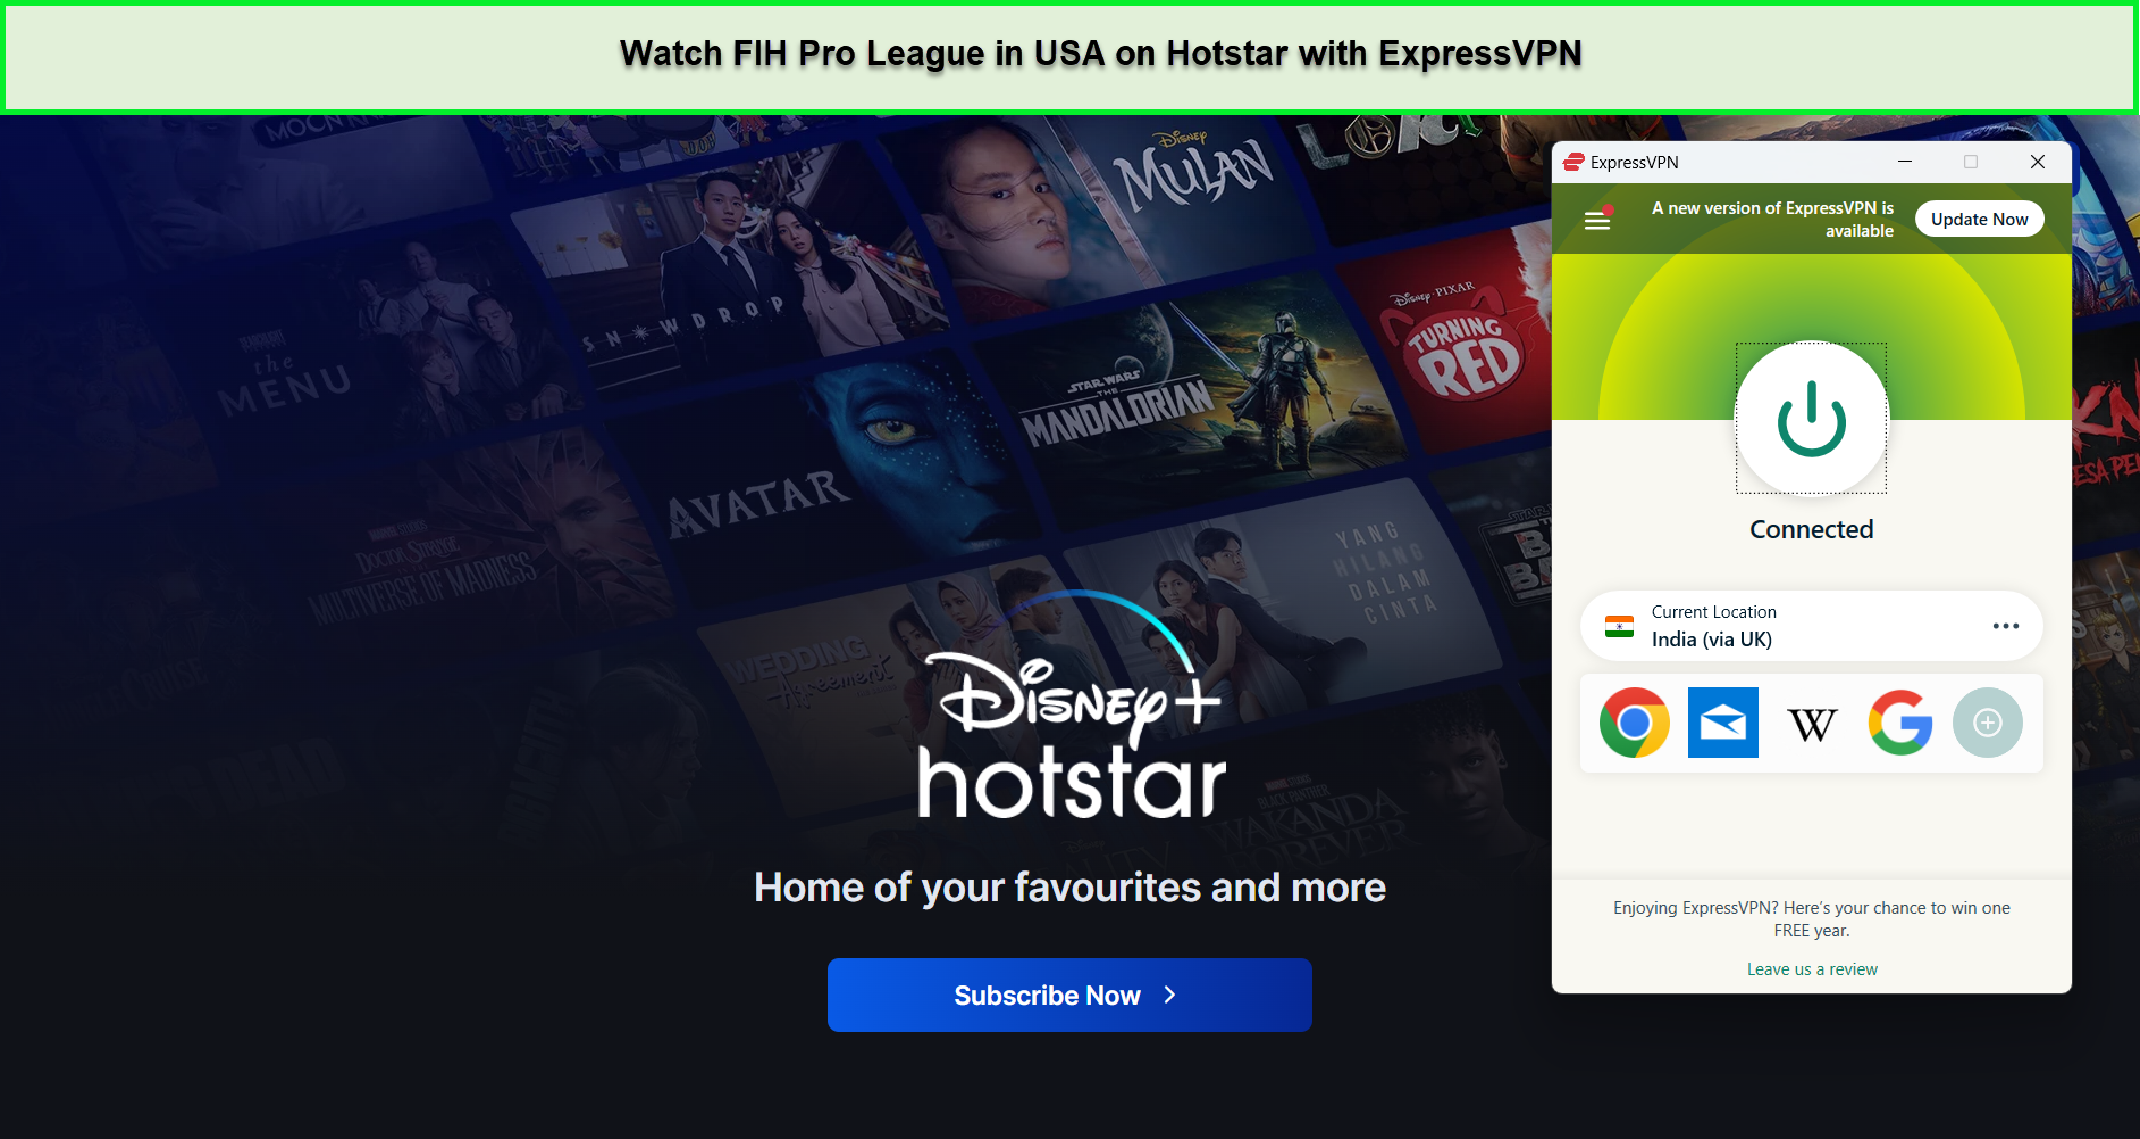 Wtch-FIH-Pro-League-On-Hotstar-With-ExpressVPN